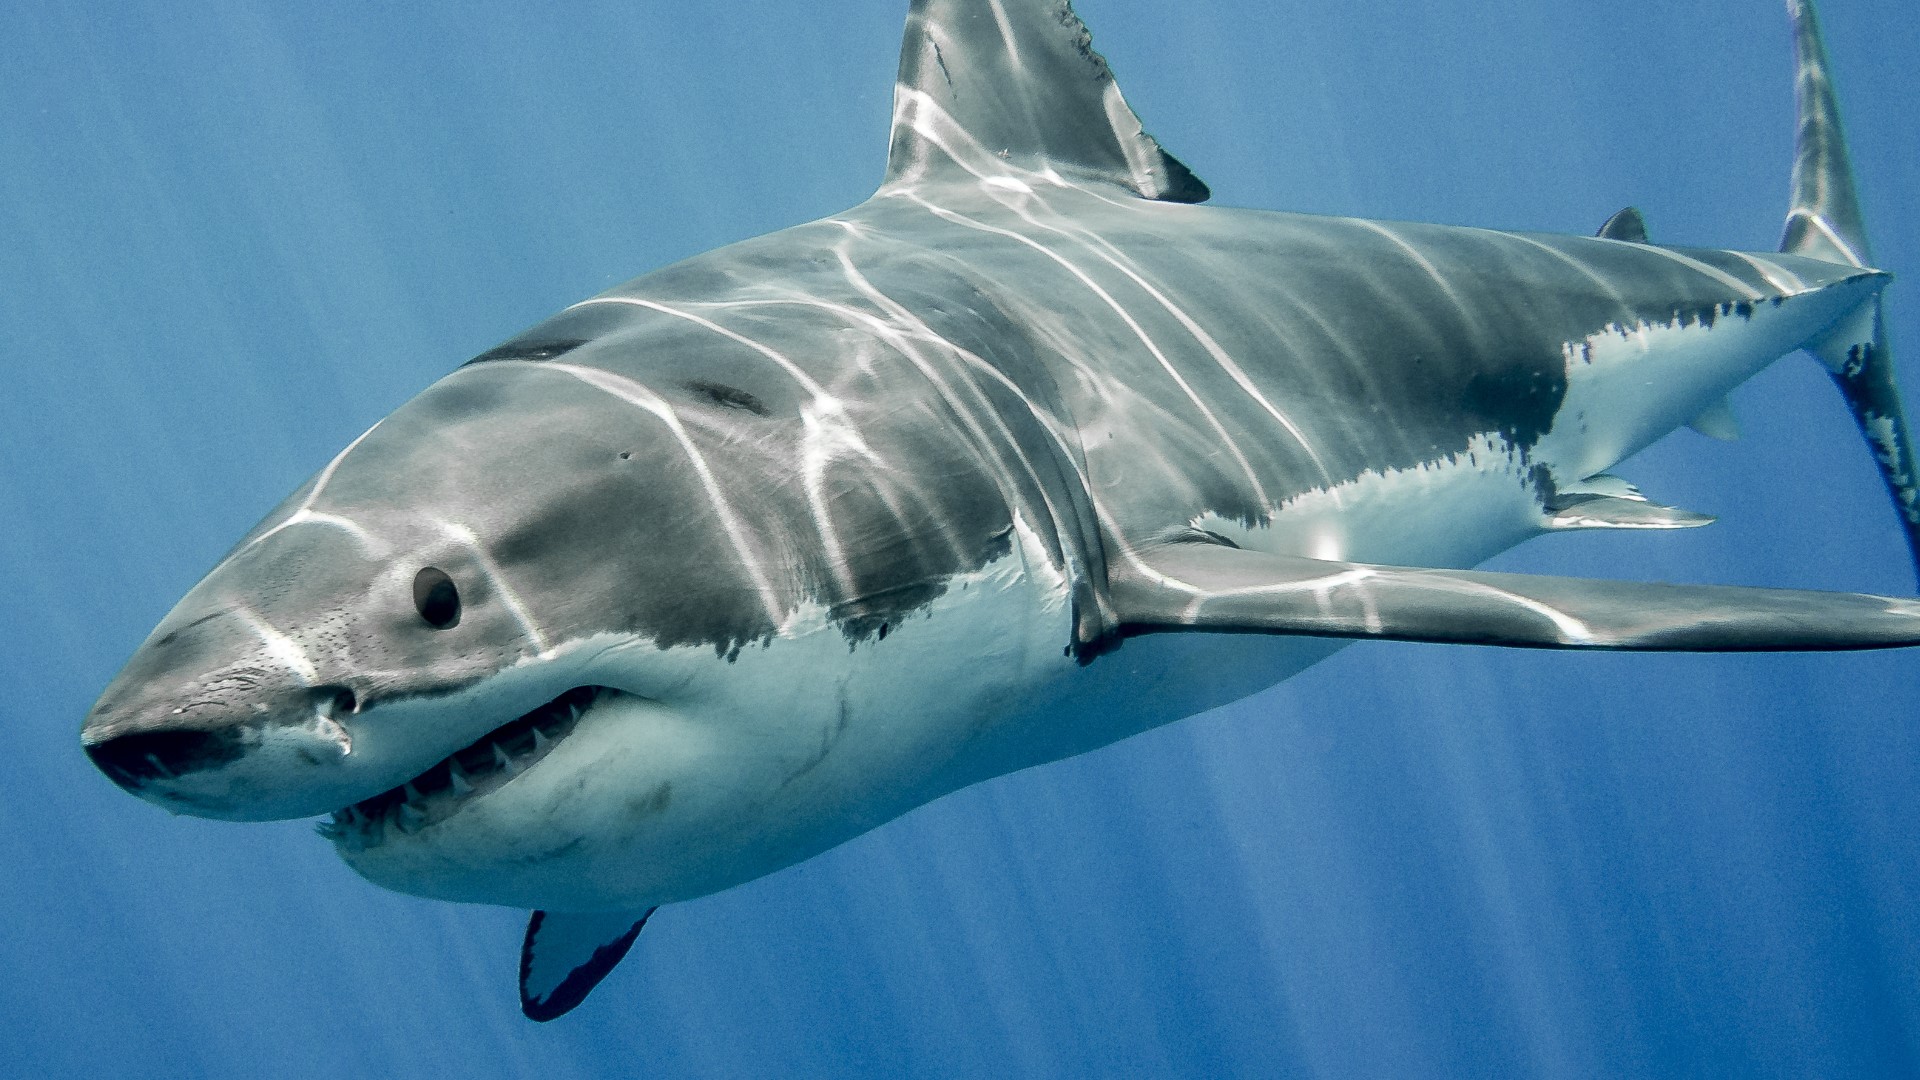 While you may be afraid of sharks lurking in the water, they probably should be more afraid of us.